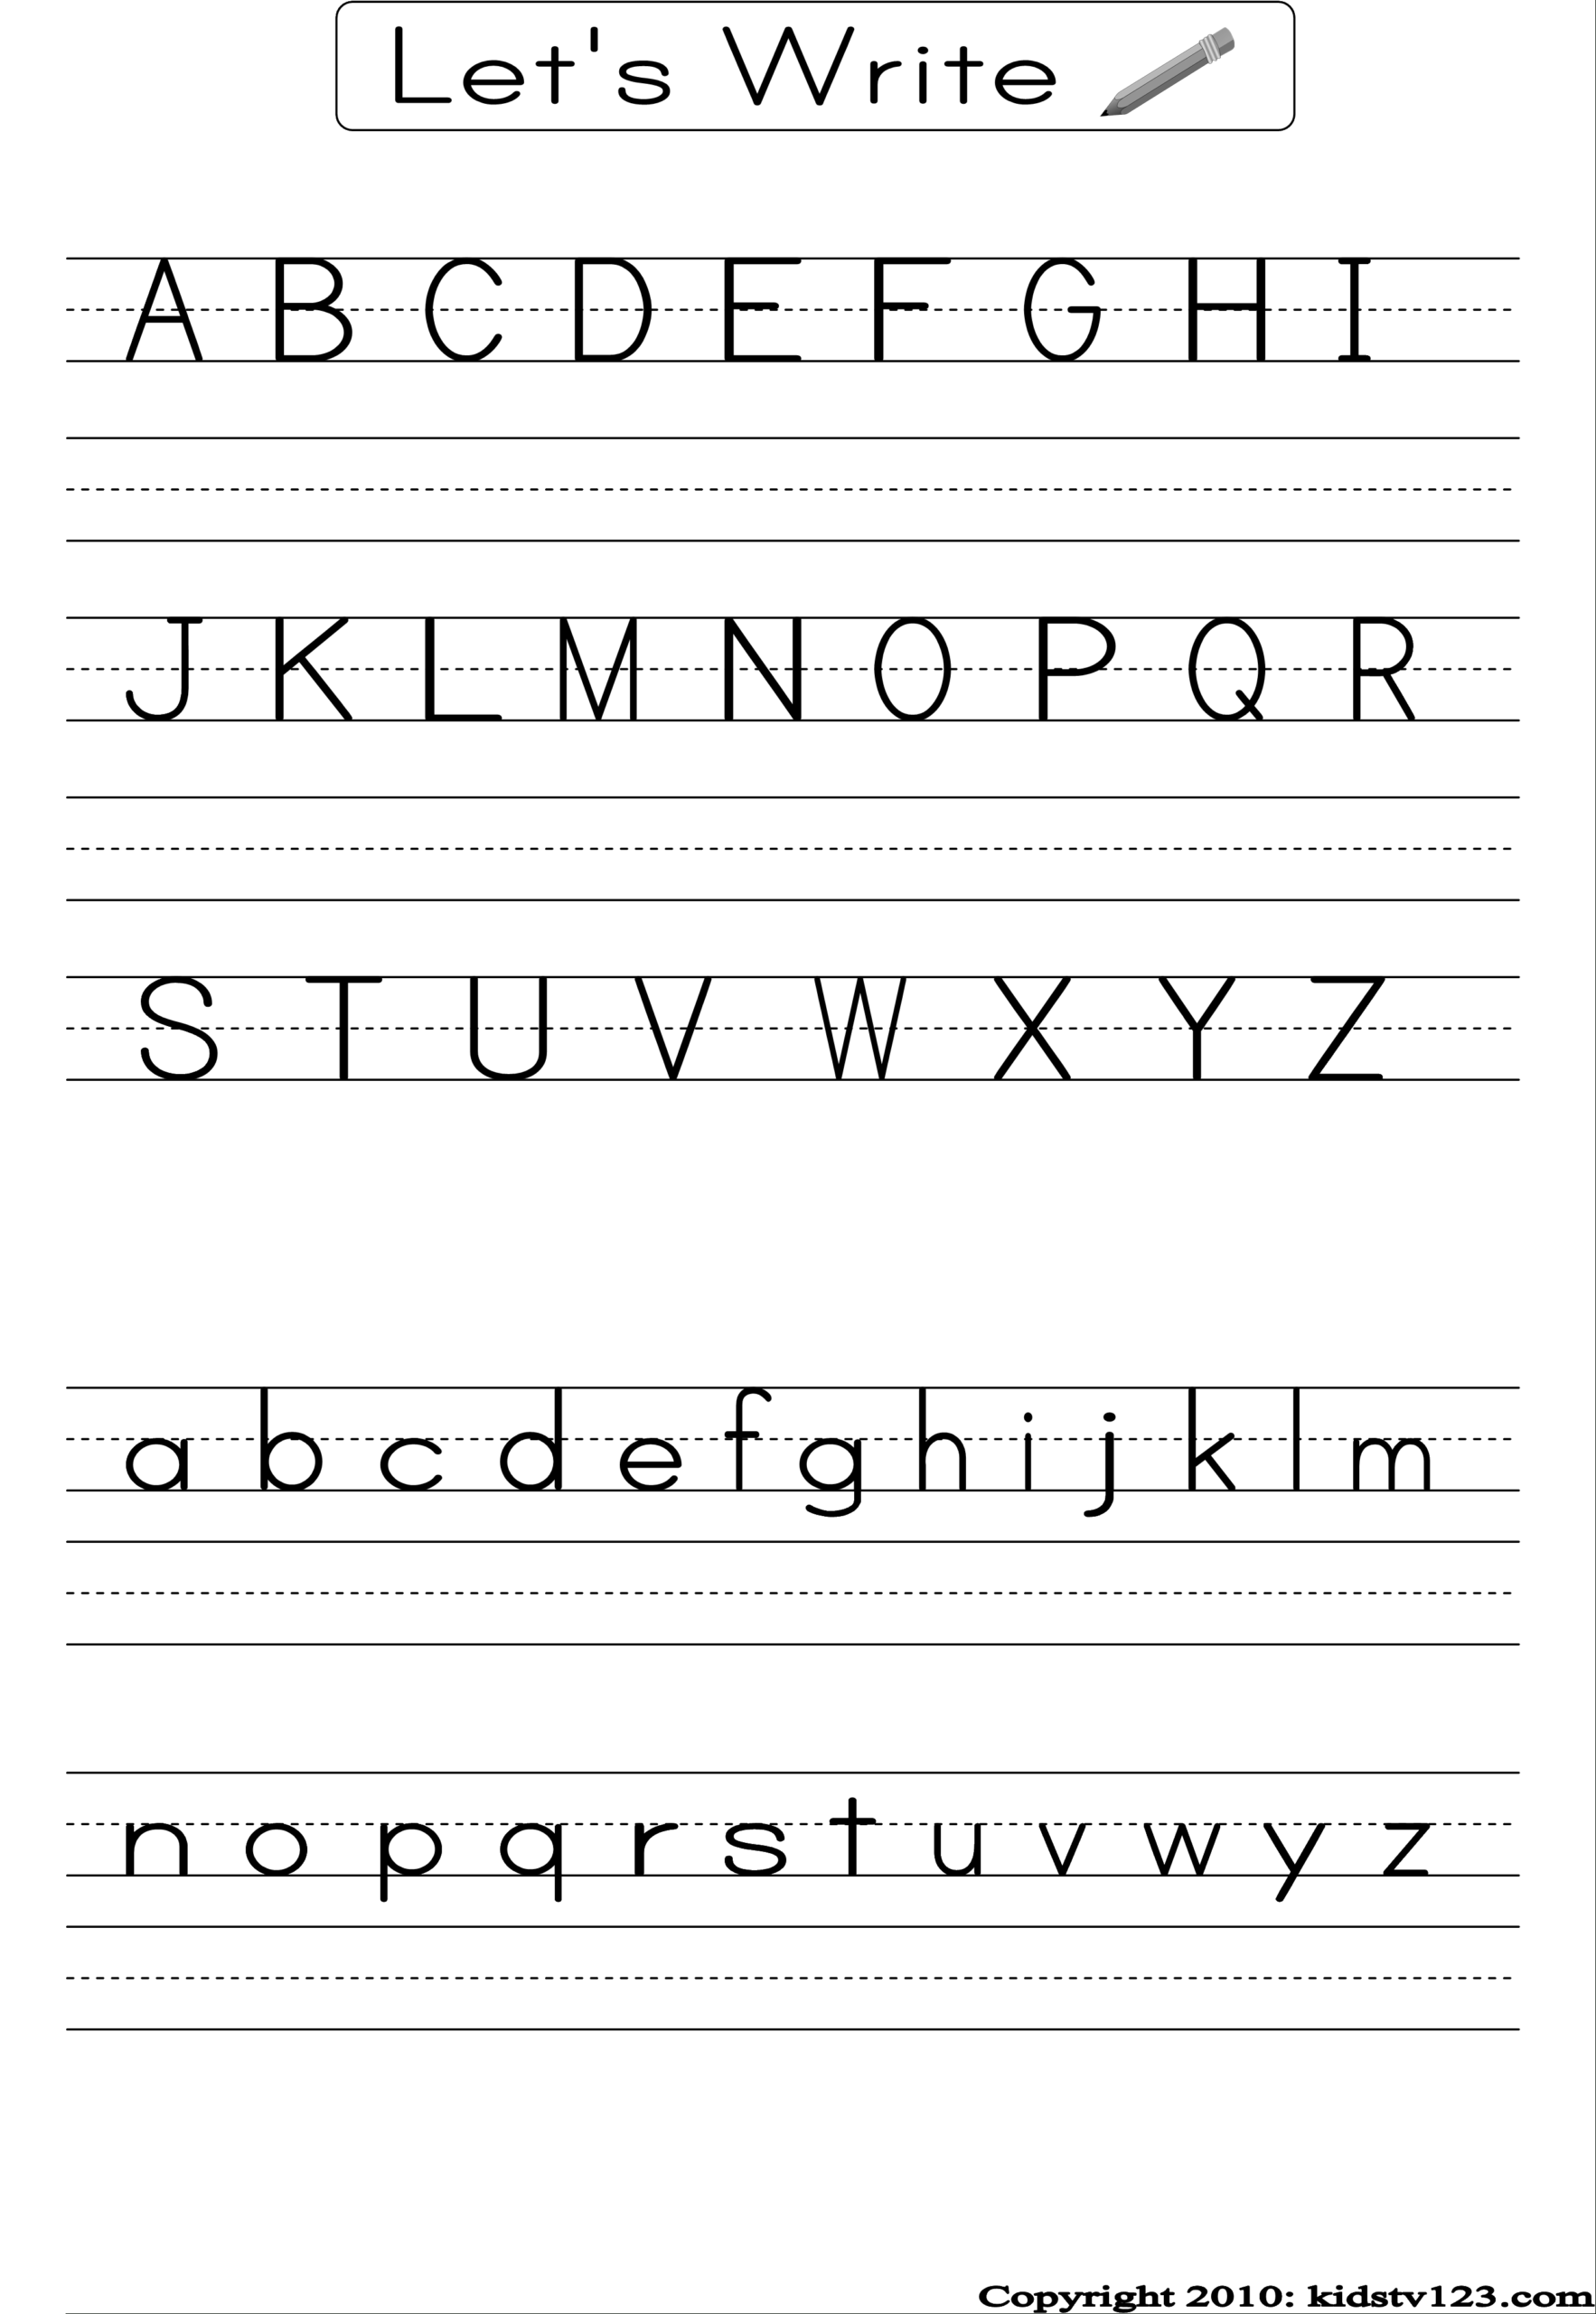 Alphabet Writing Practice Sheet | Alphabet Writing Practice intended for Alphabet Pattern Worksheets